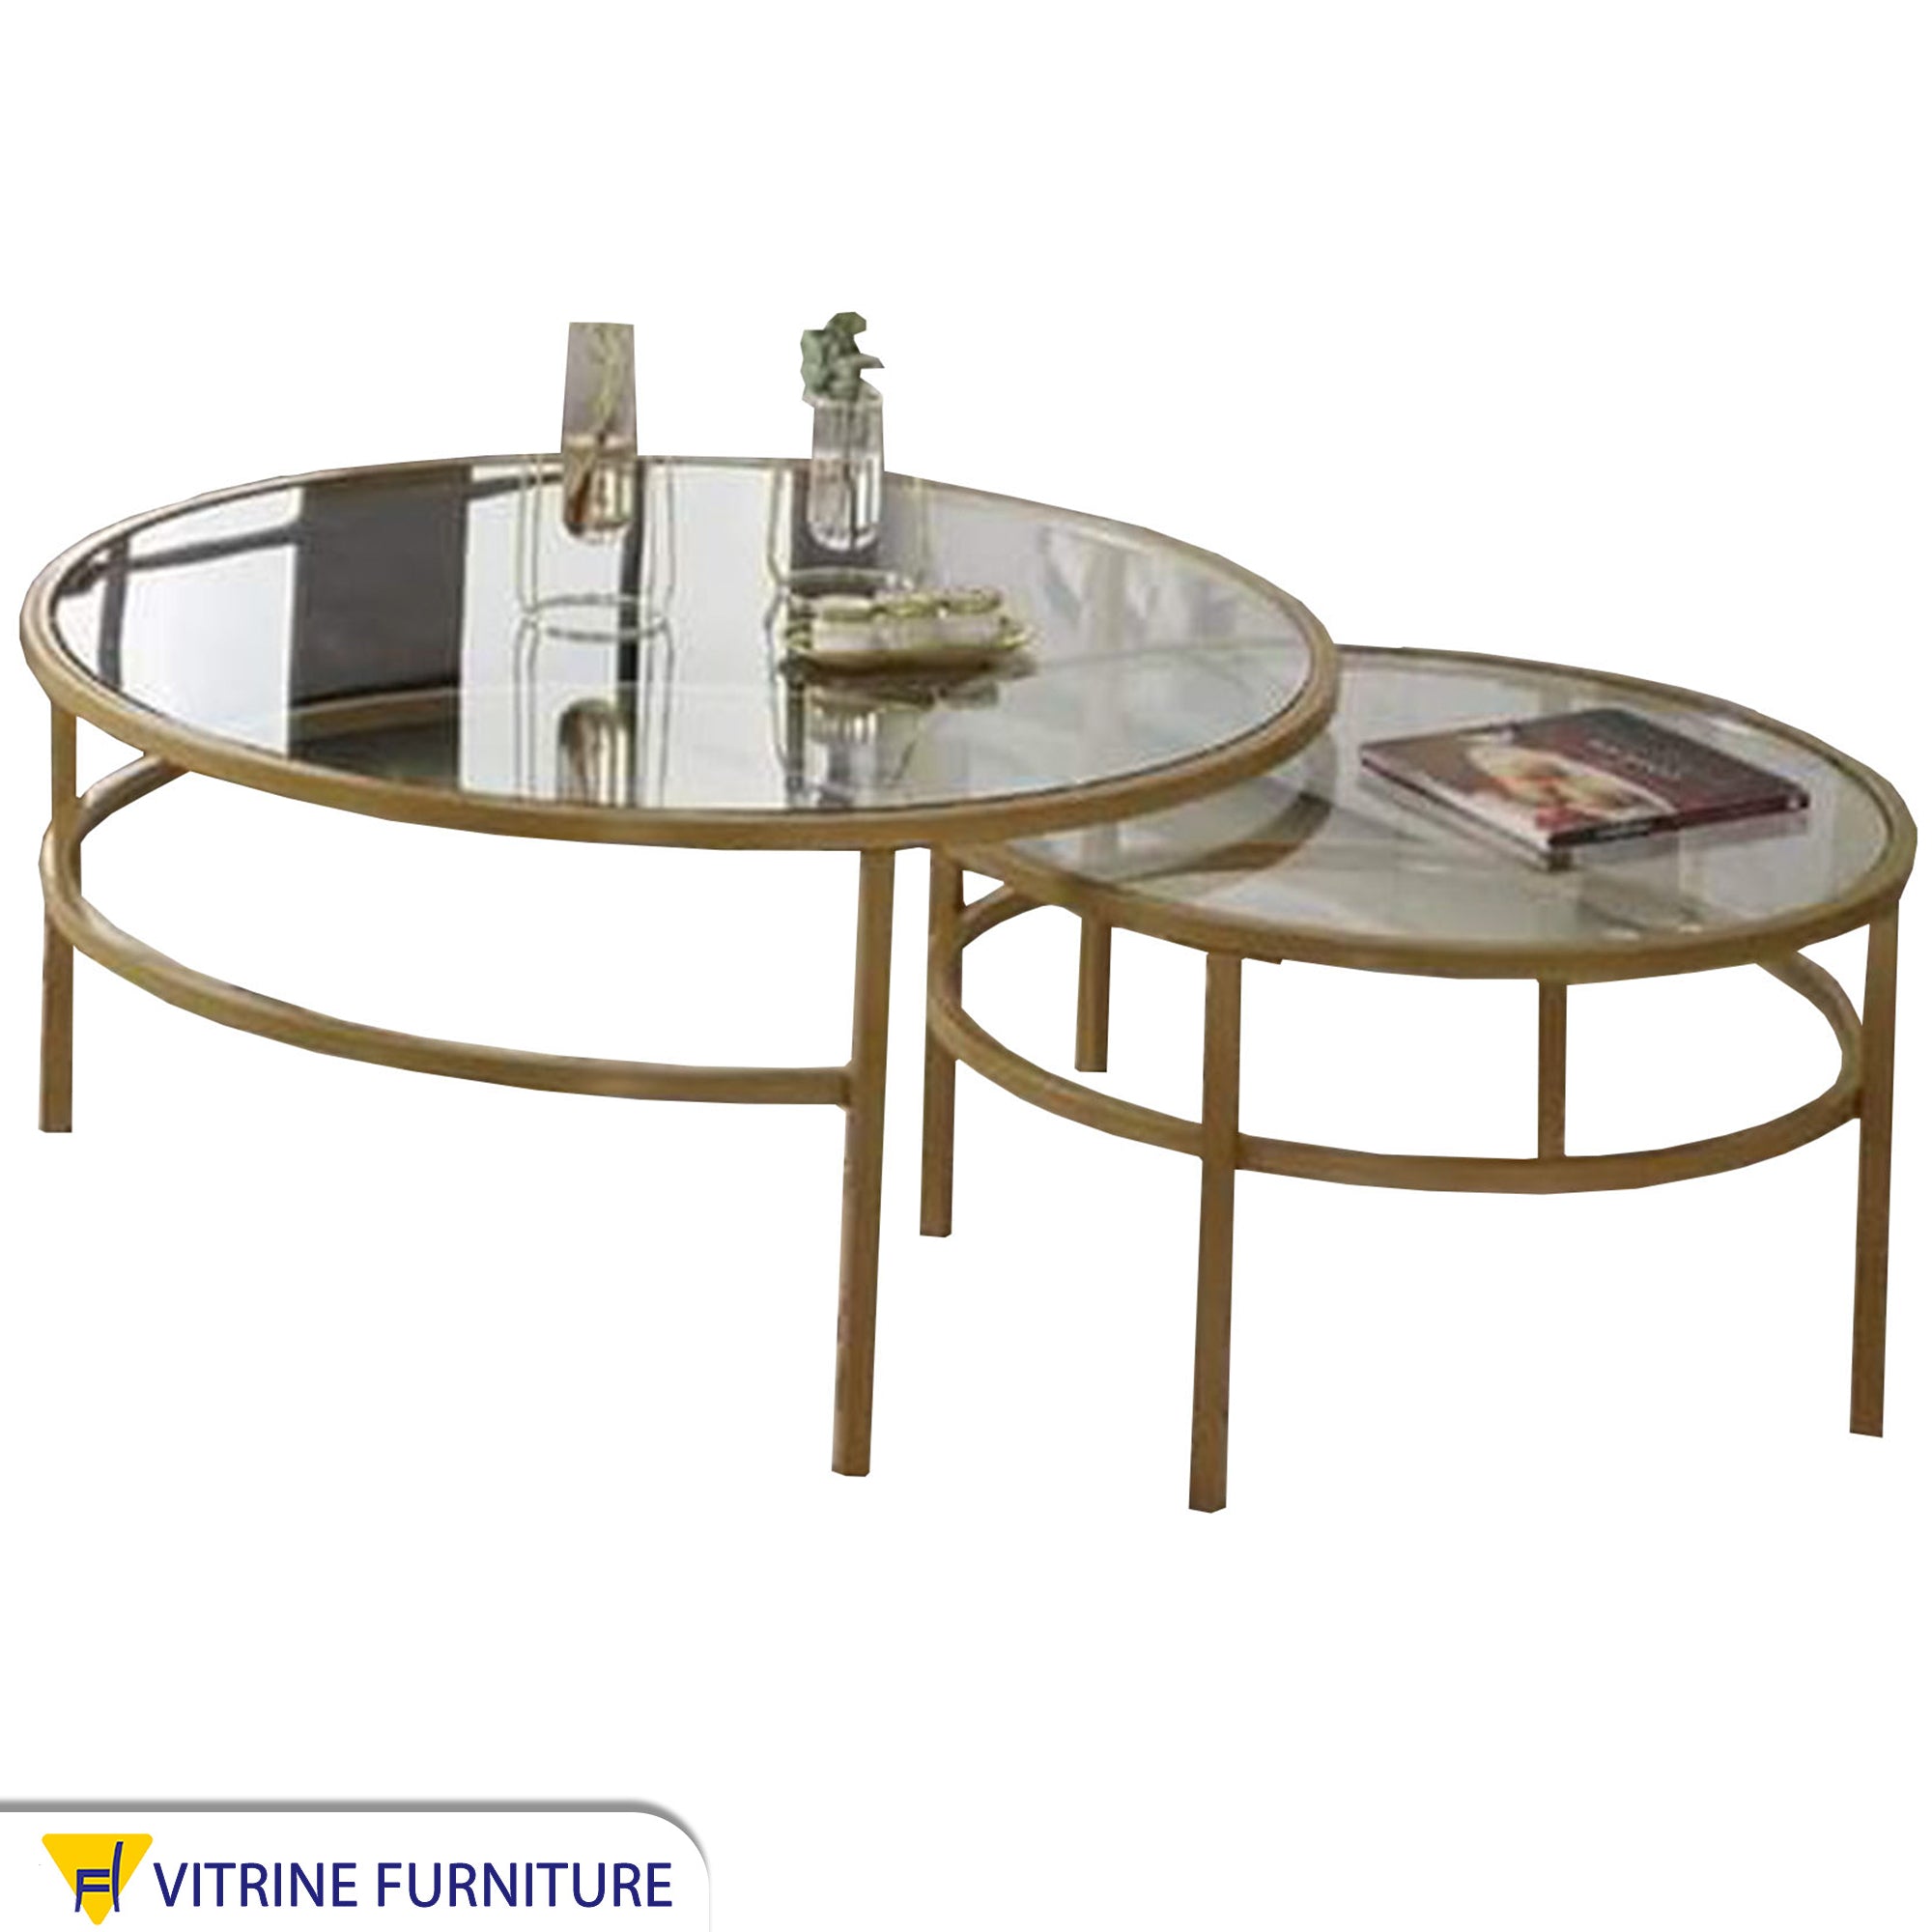 Two circular tables in golden color